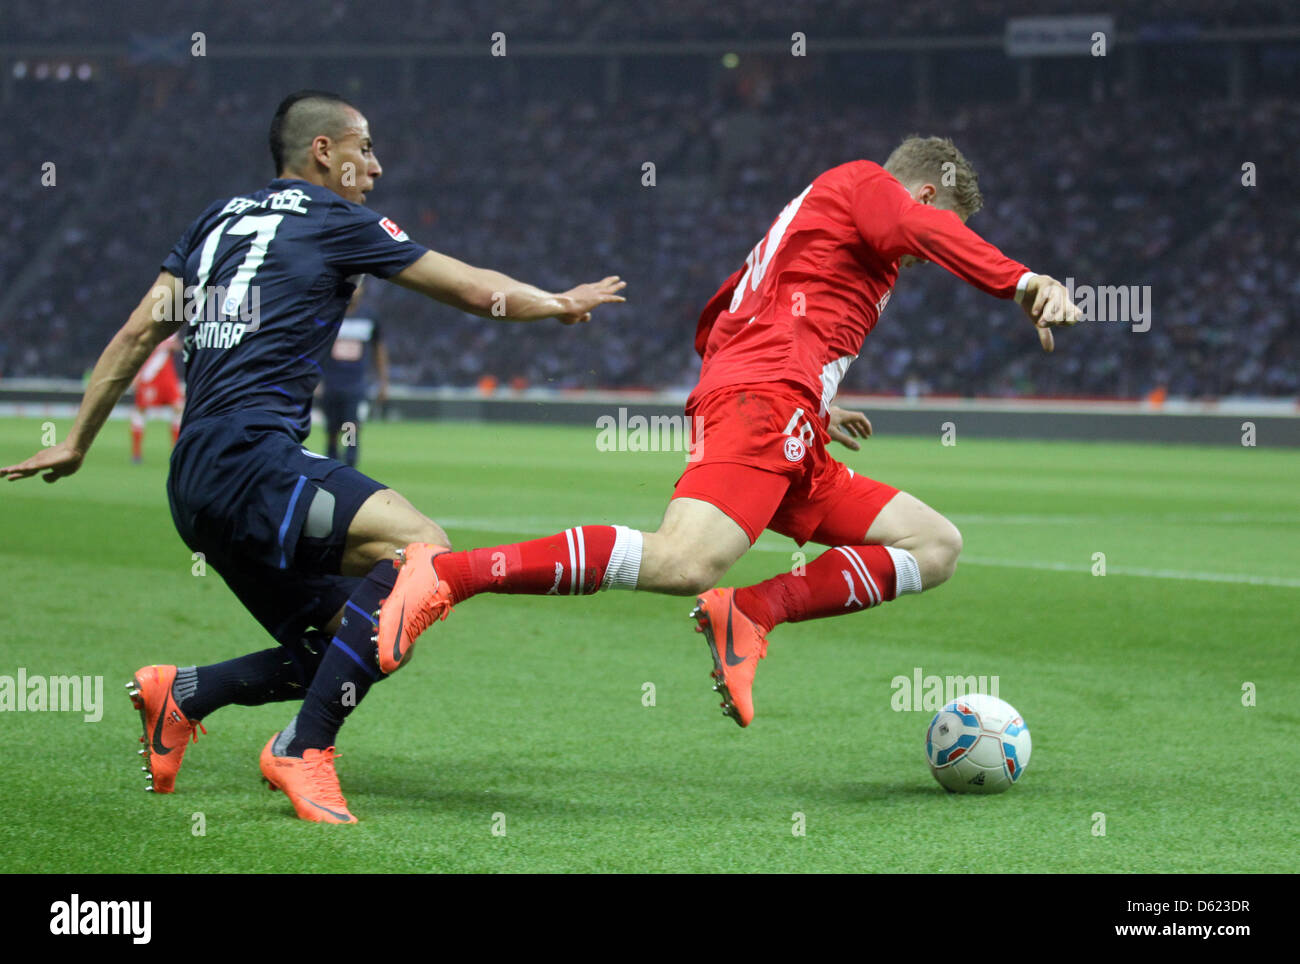 Hertha's Anis Ben-Hatira (L) chases a Duesseldorf player with the ball during the first leg Bundesliga relegation match Hertha Berlin versus Fortuna Duesseldorf at Olympic Stadium in Berlin, Germany, Olympiastadion. Hertha lost the match 1-2. Photo: Kay Nietfeld Stock Photo